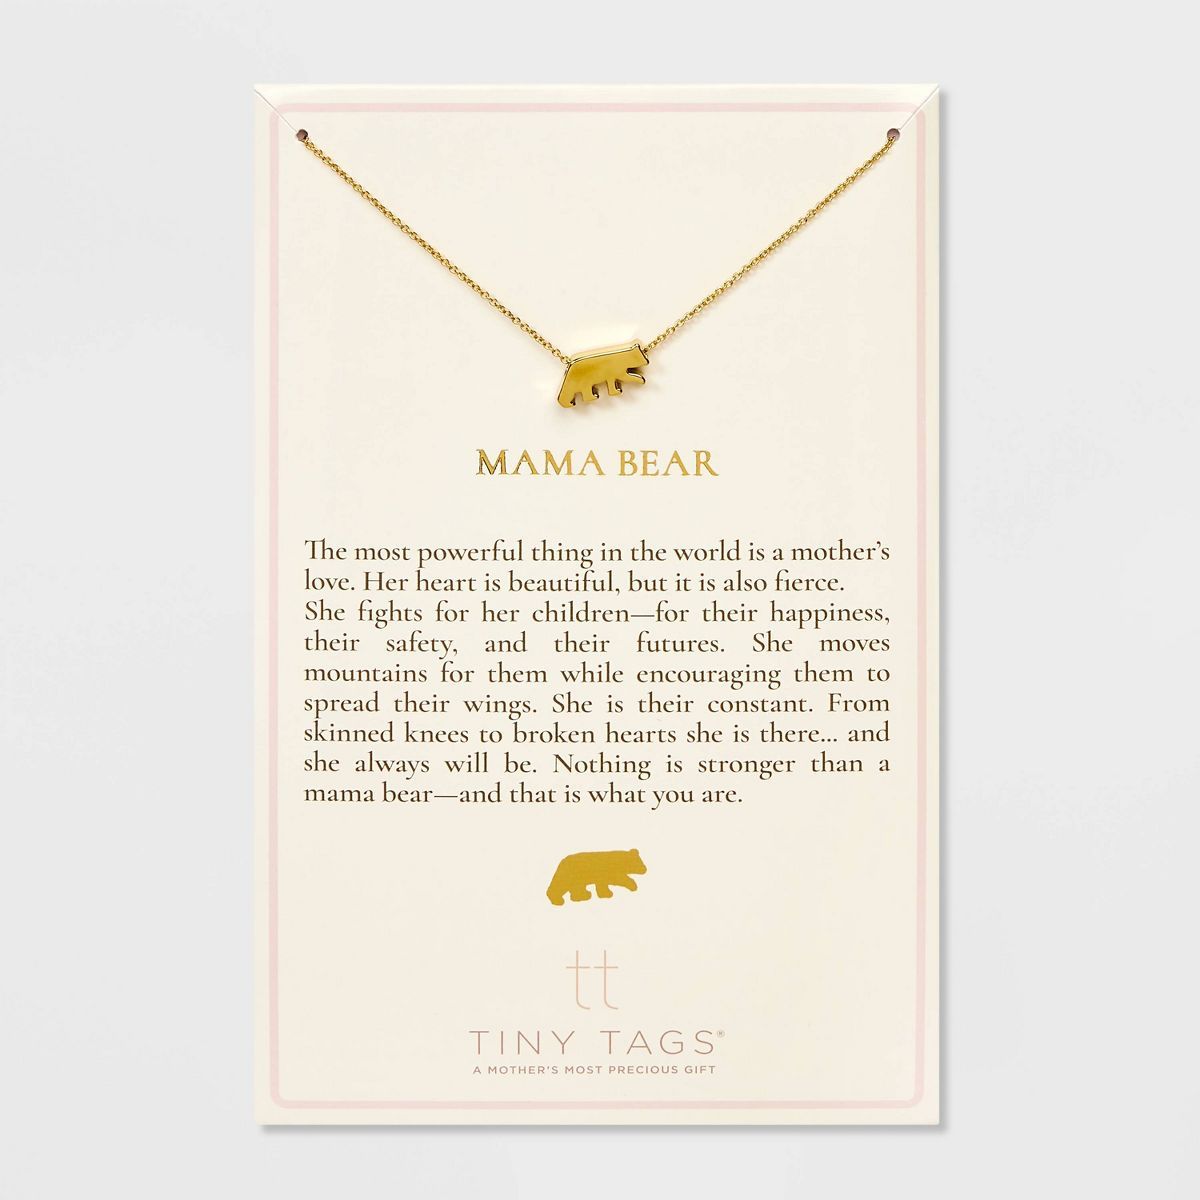 Tiny Tags 14K Gold Ion Plated Mama Bear Chain Necklace - Gold | Target